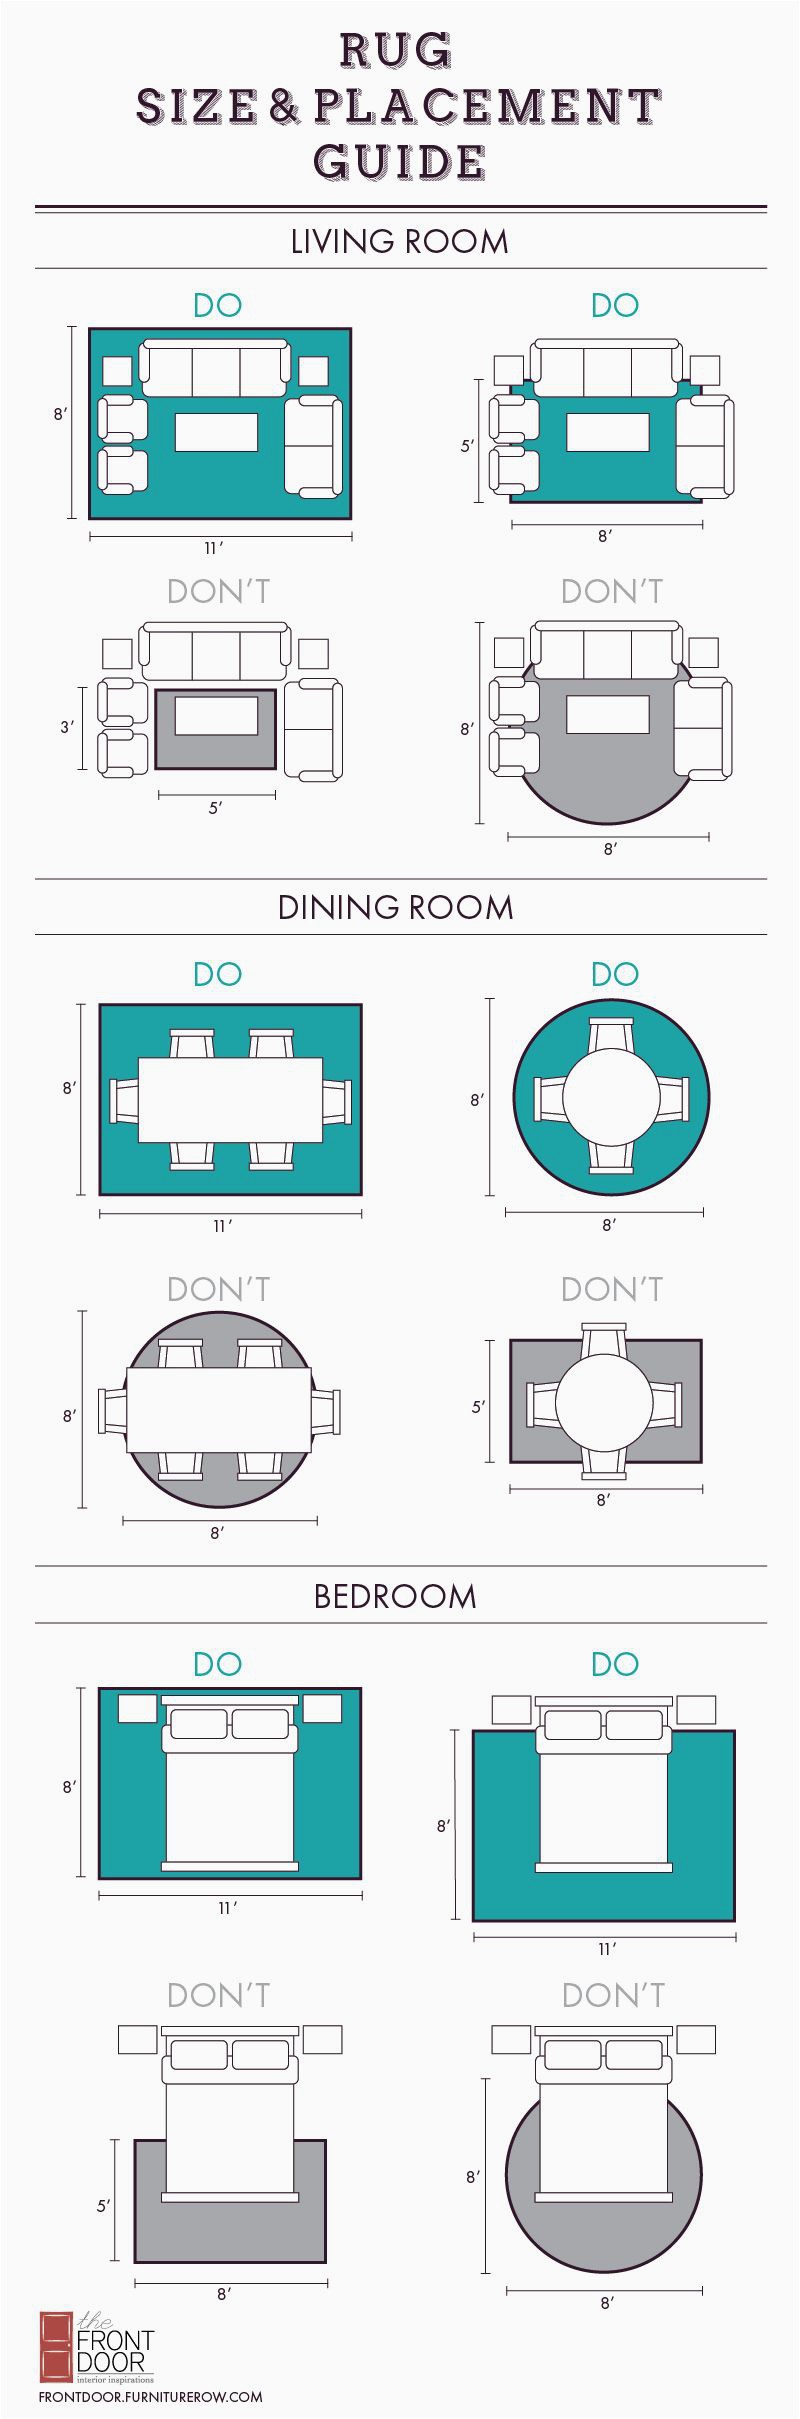 Rules for area Rug Placement Reveal Secrets Dining Room Rug Placement 44